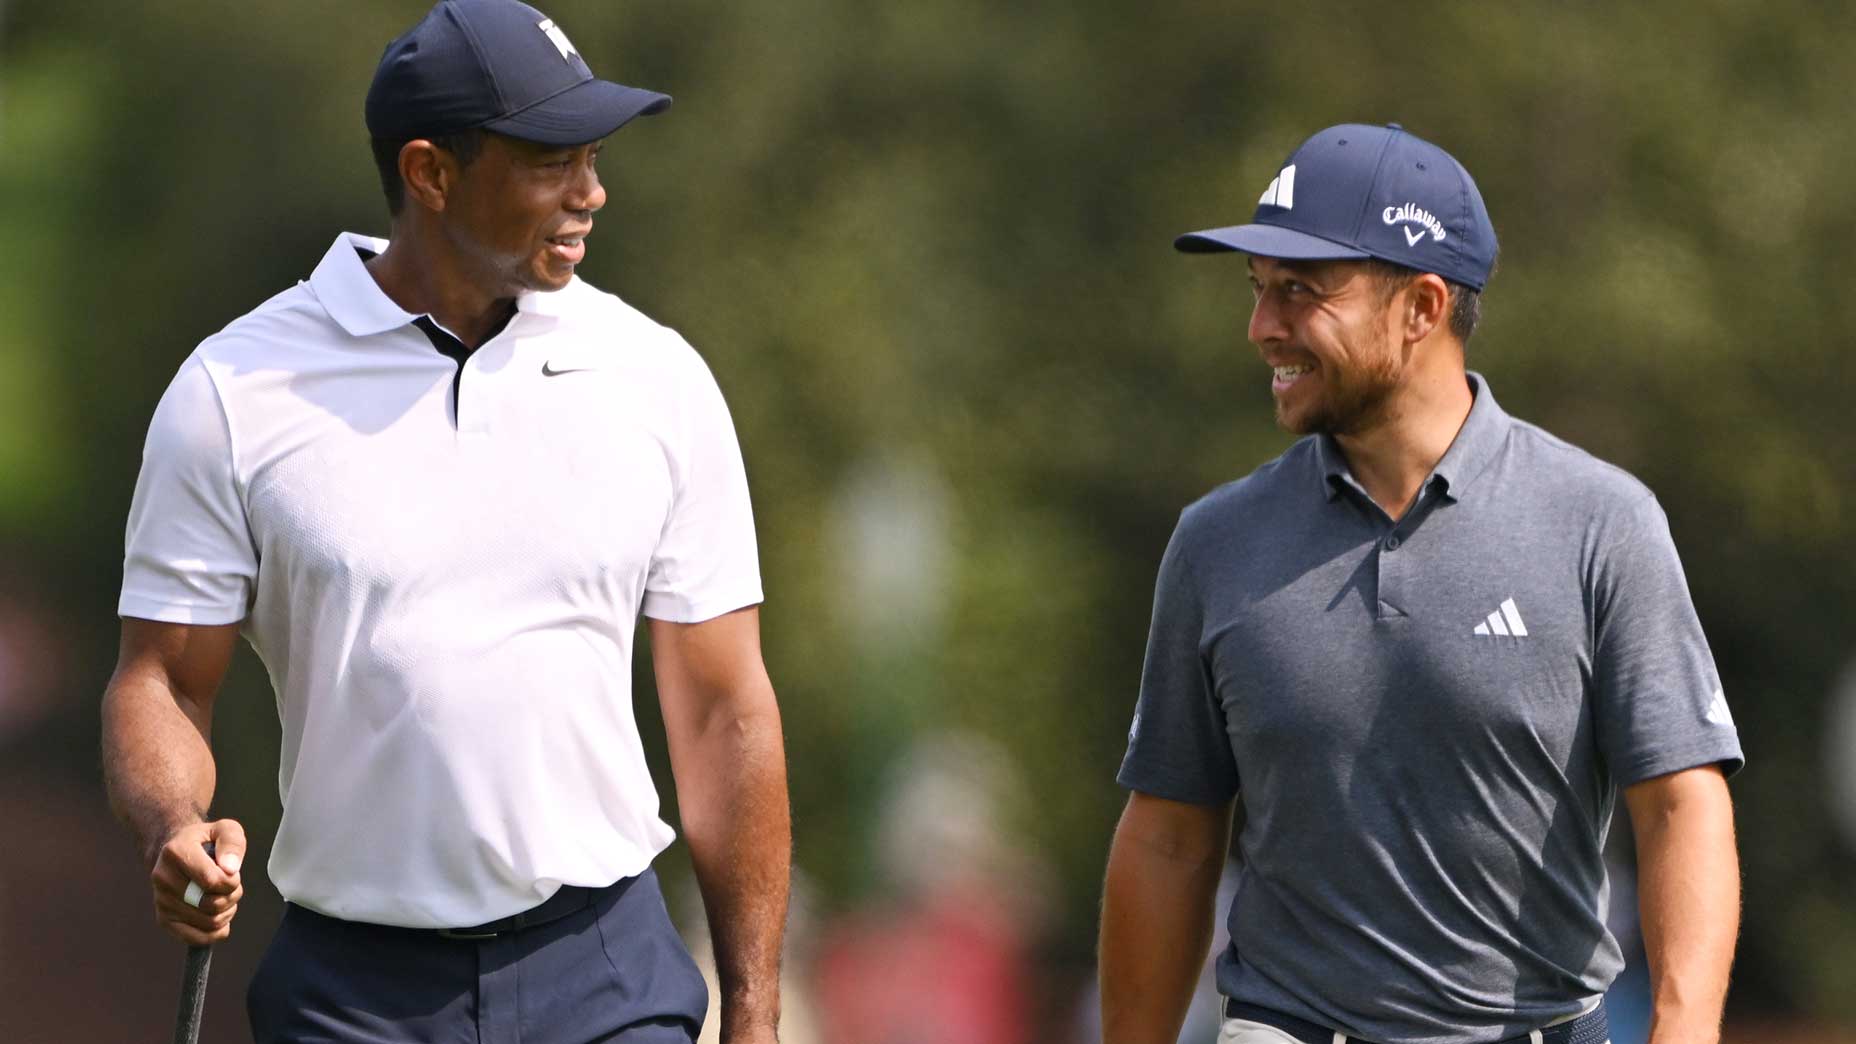 Tiger Woods sent 'awesome' text to Xander Schauffele after PGA win